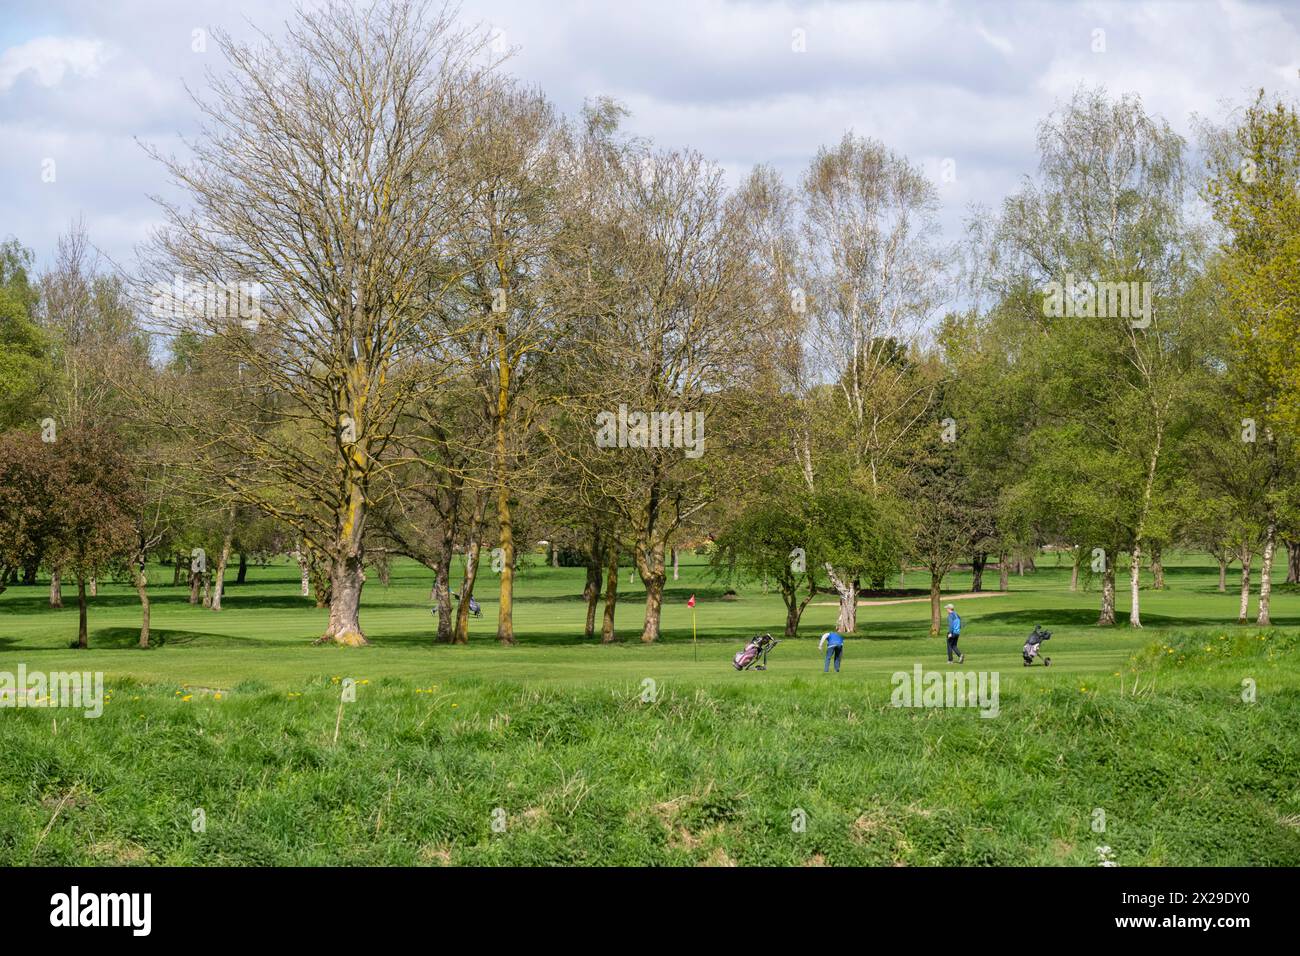 Golf course beside the river Mersey in South Manchester, England. Stock Photo